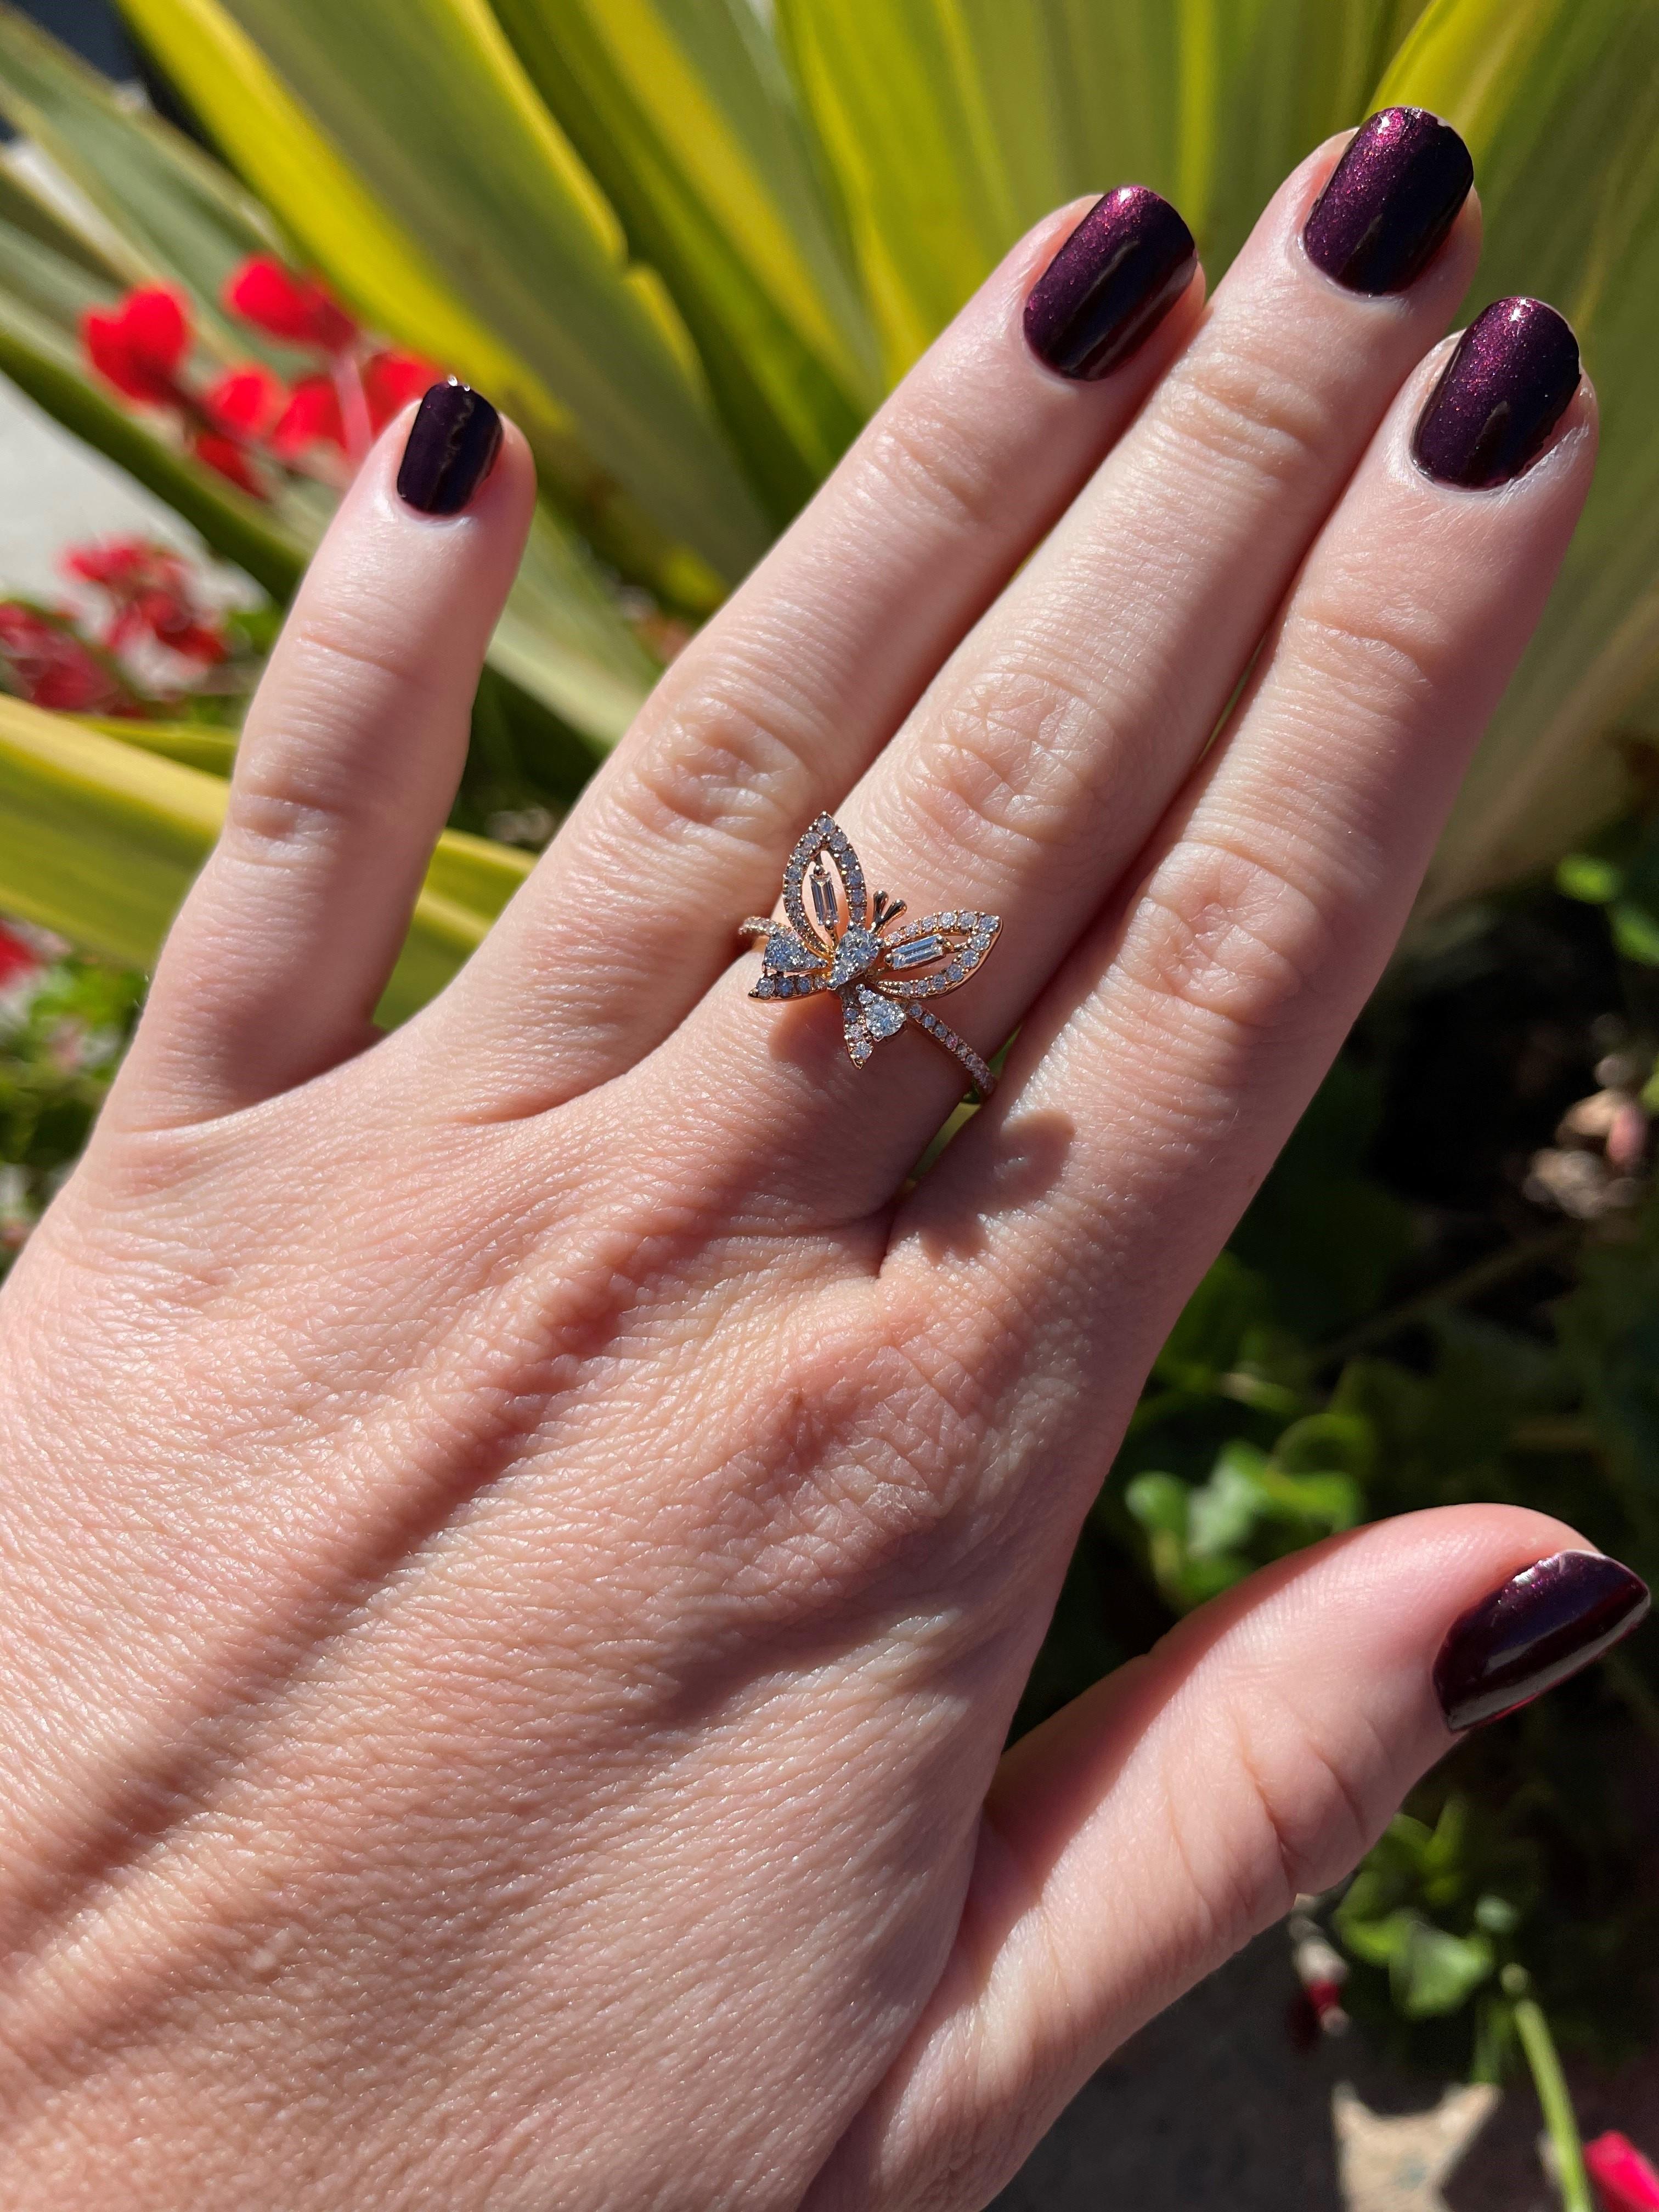 This sophisticated butterfly ring is crafted of 18k rose gold with 0.49 total carat weight of diamonds in G-H Color and VS2-SI clarity.